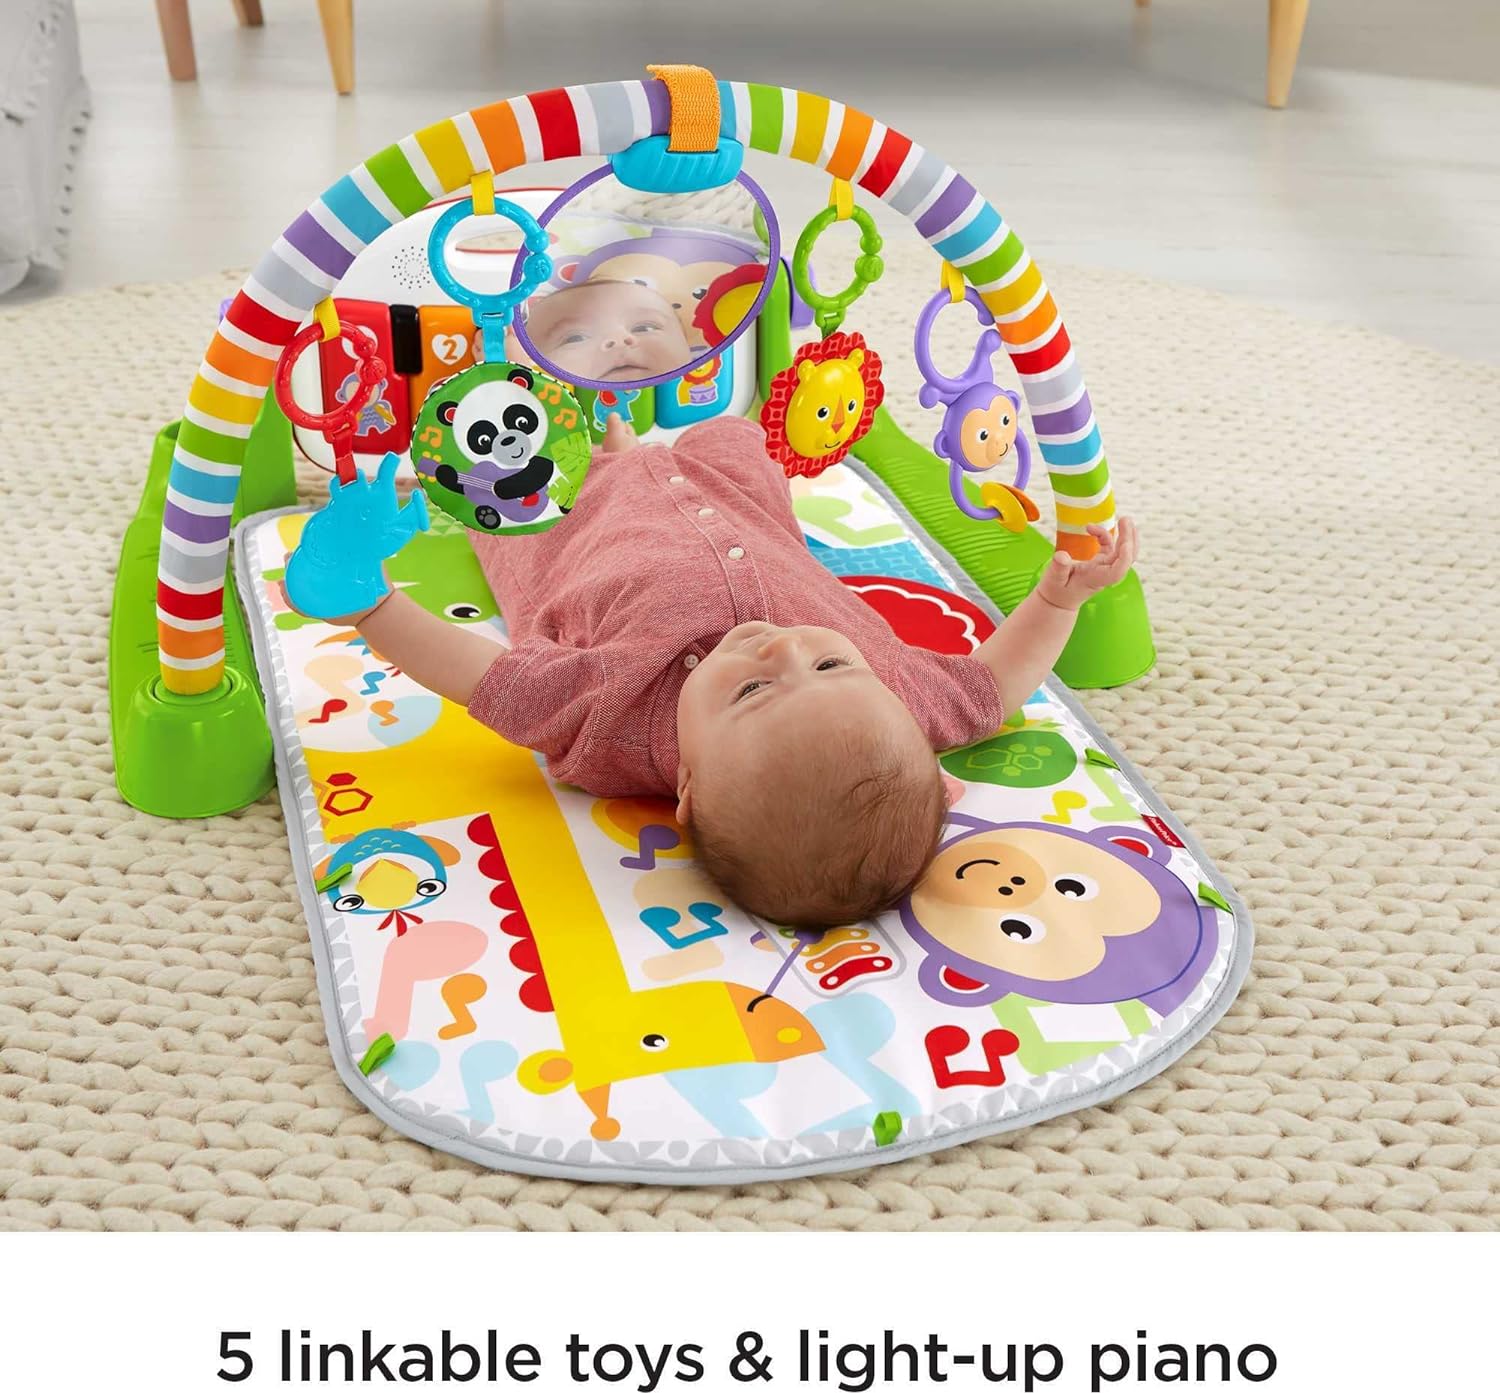 Fisher-Price Baby Playmat Deluxe Kick & Play Piano Gym with Musical Toy Lights & Smart Stages Learning Content for Newborn To Toddler